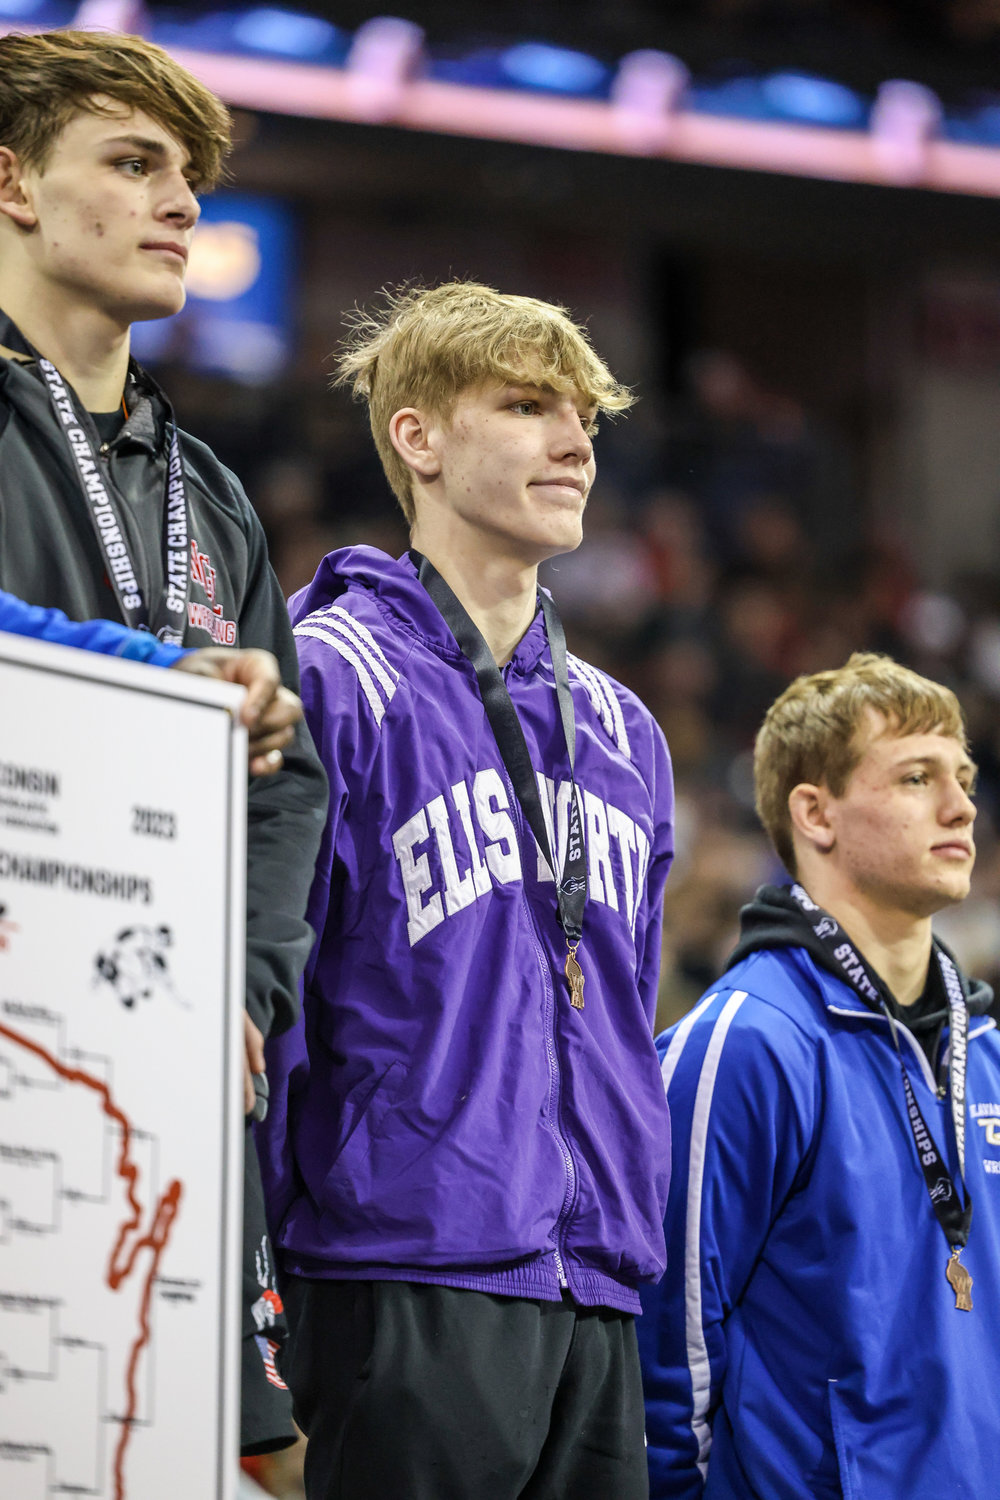 2-25-23 Ellsworth's William Penn stands on the podium after recieving his fourth place medal at the WIAA state wrestling tournament. Penn went 3-2 en route to the podium finish...Nate Beier/GX3 Media